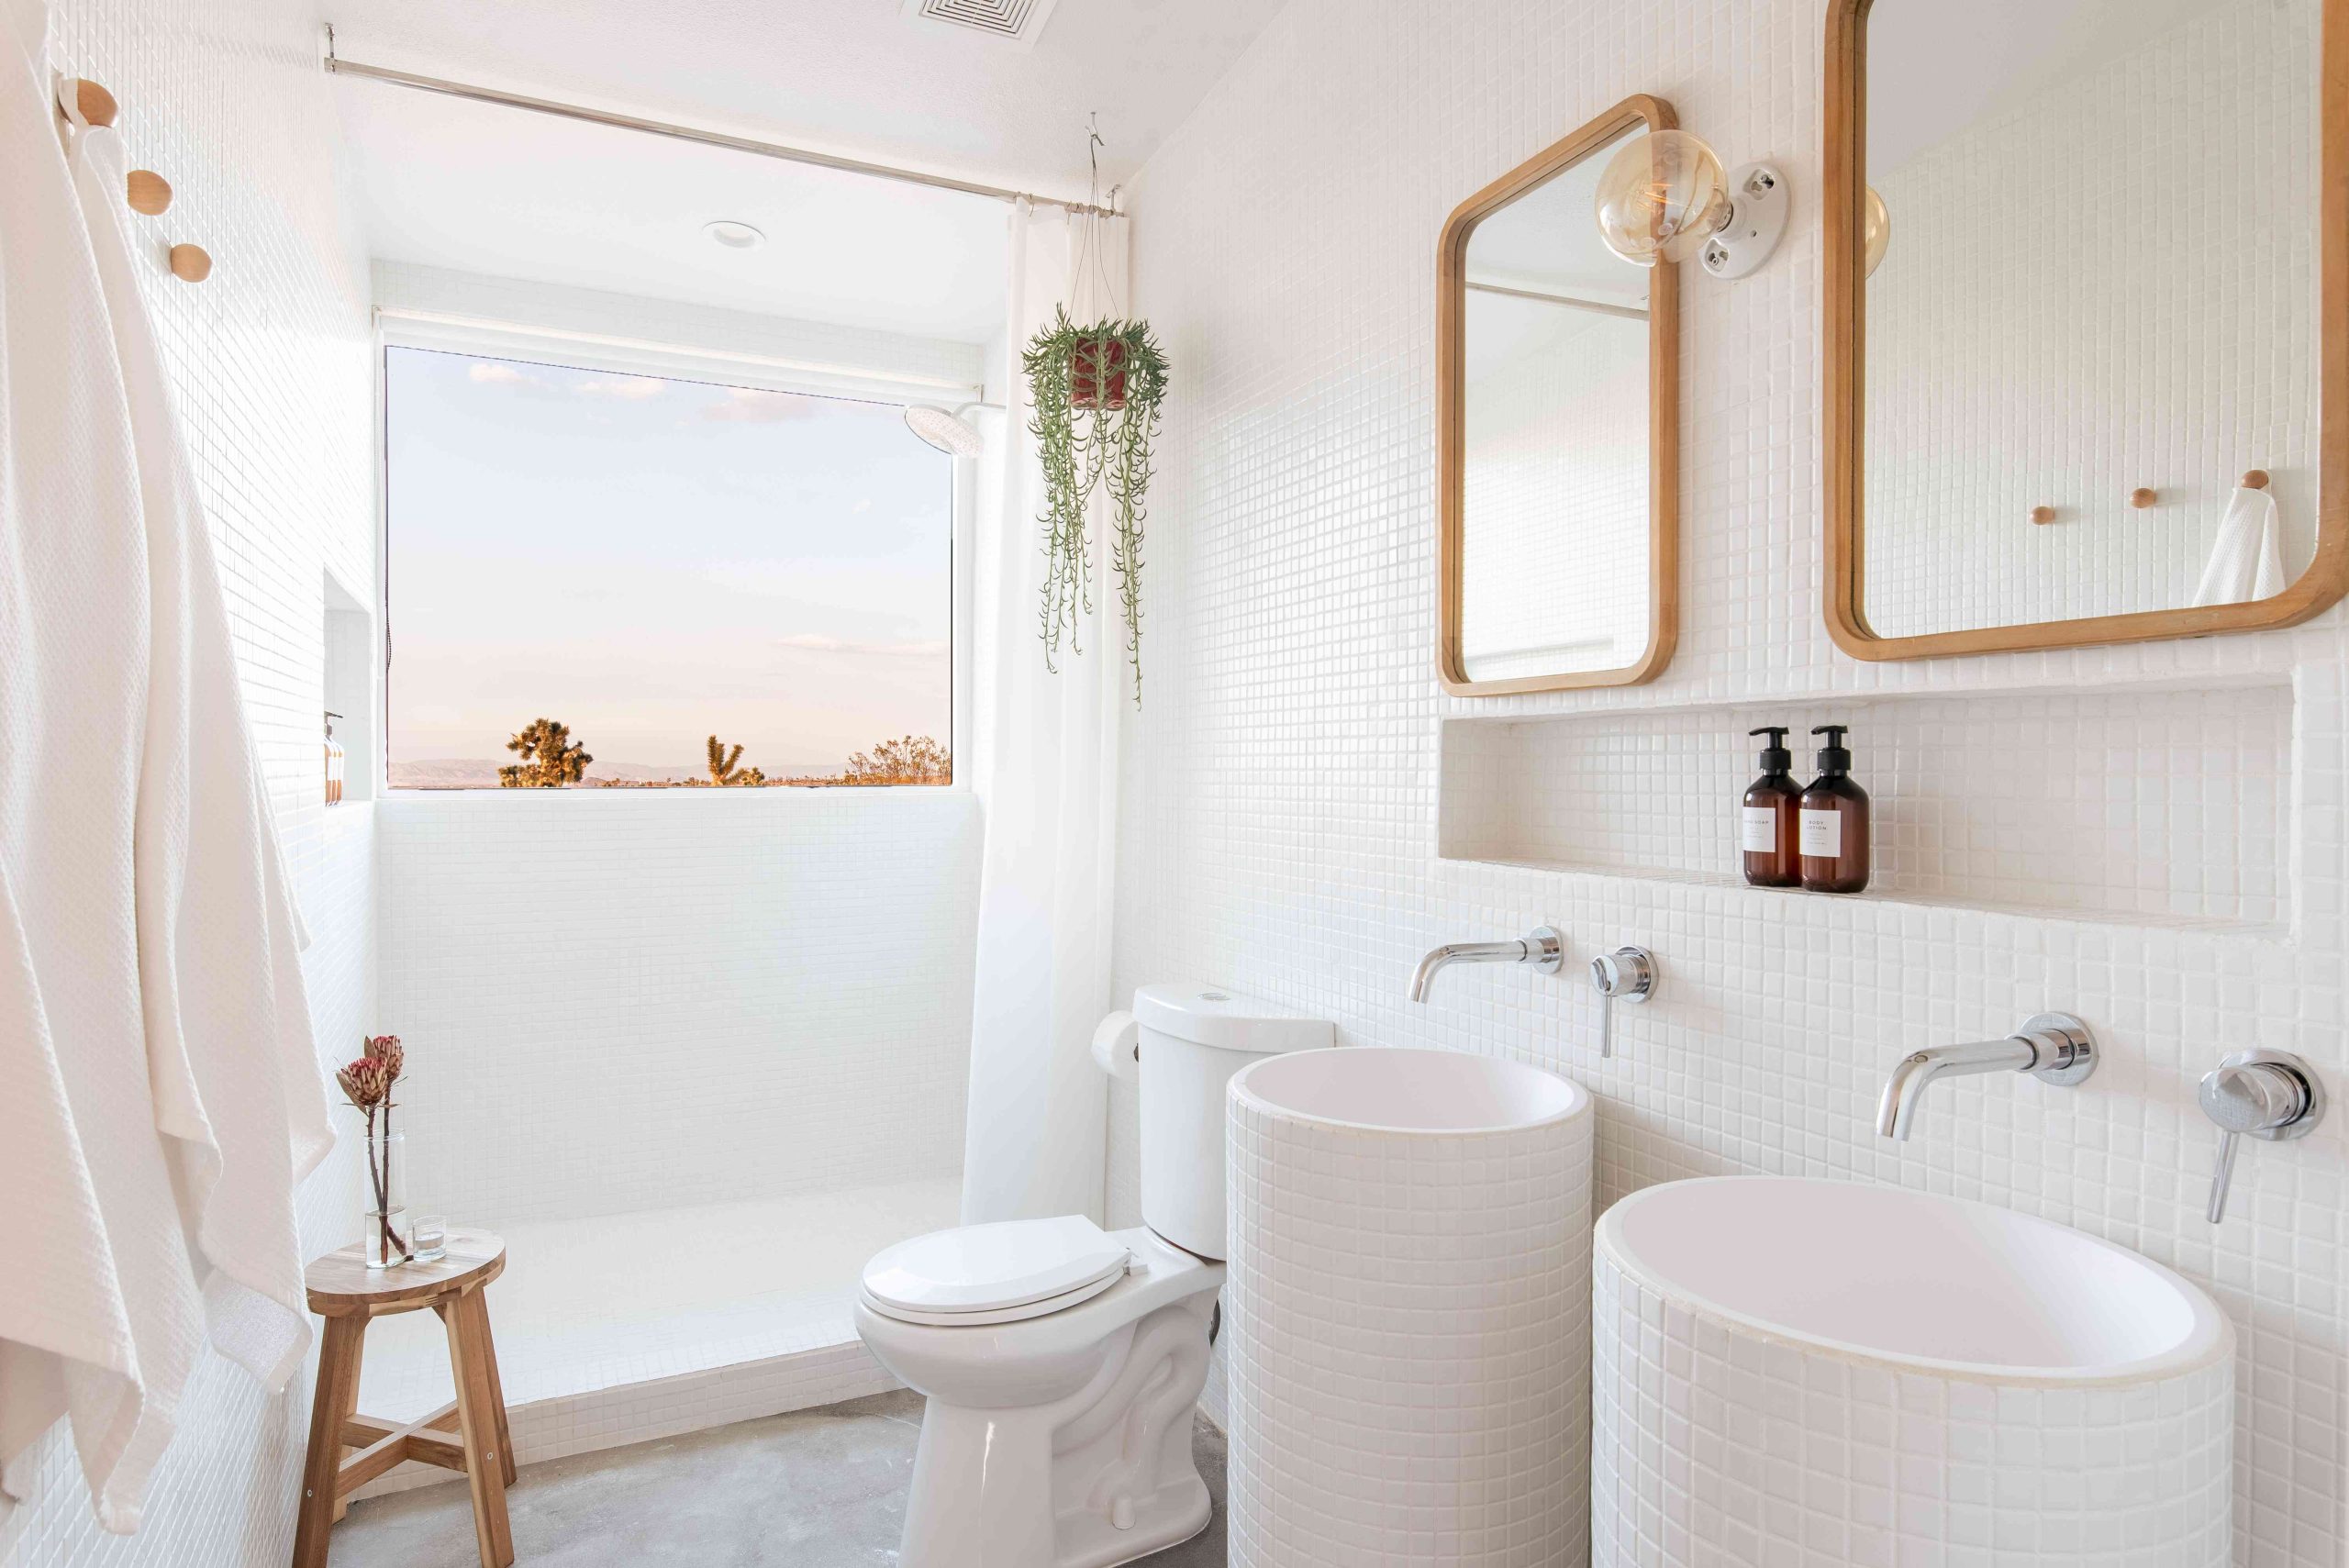 Bathroom Additions Made Easy: Where and How to Install Extra Comfort